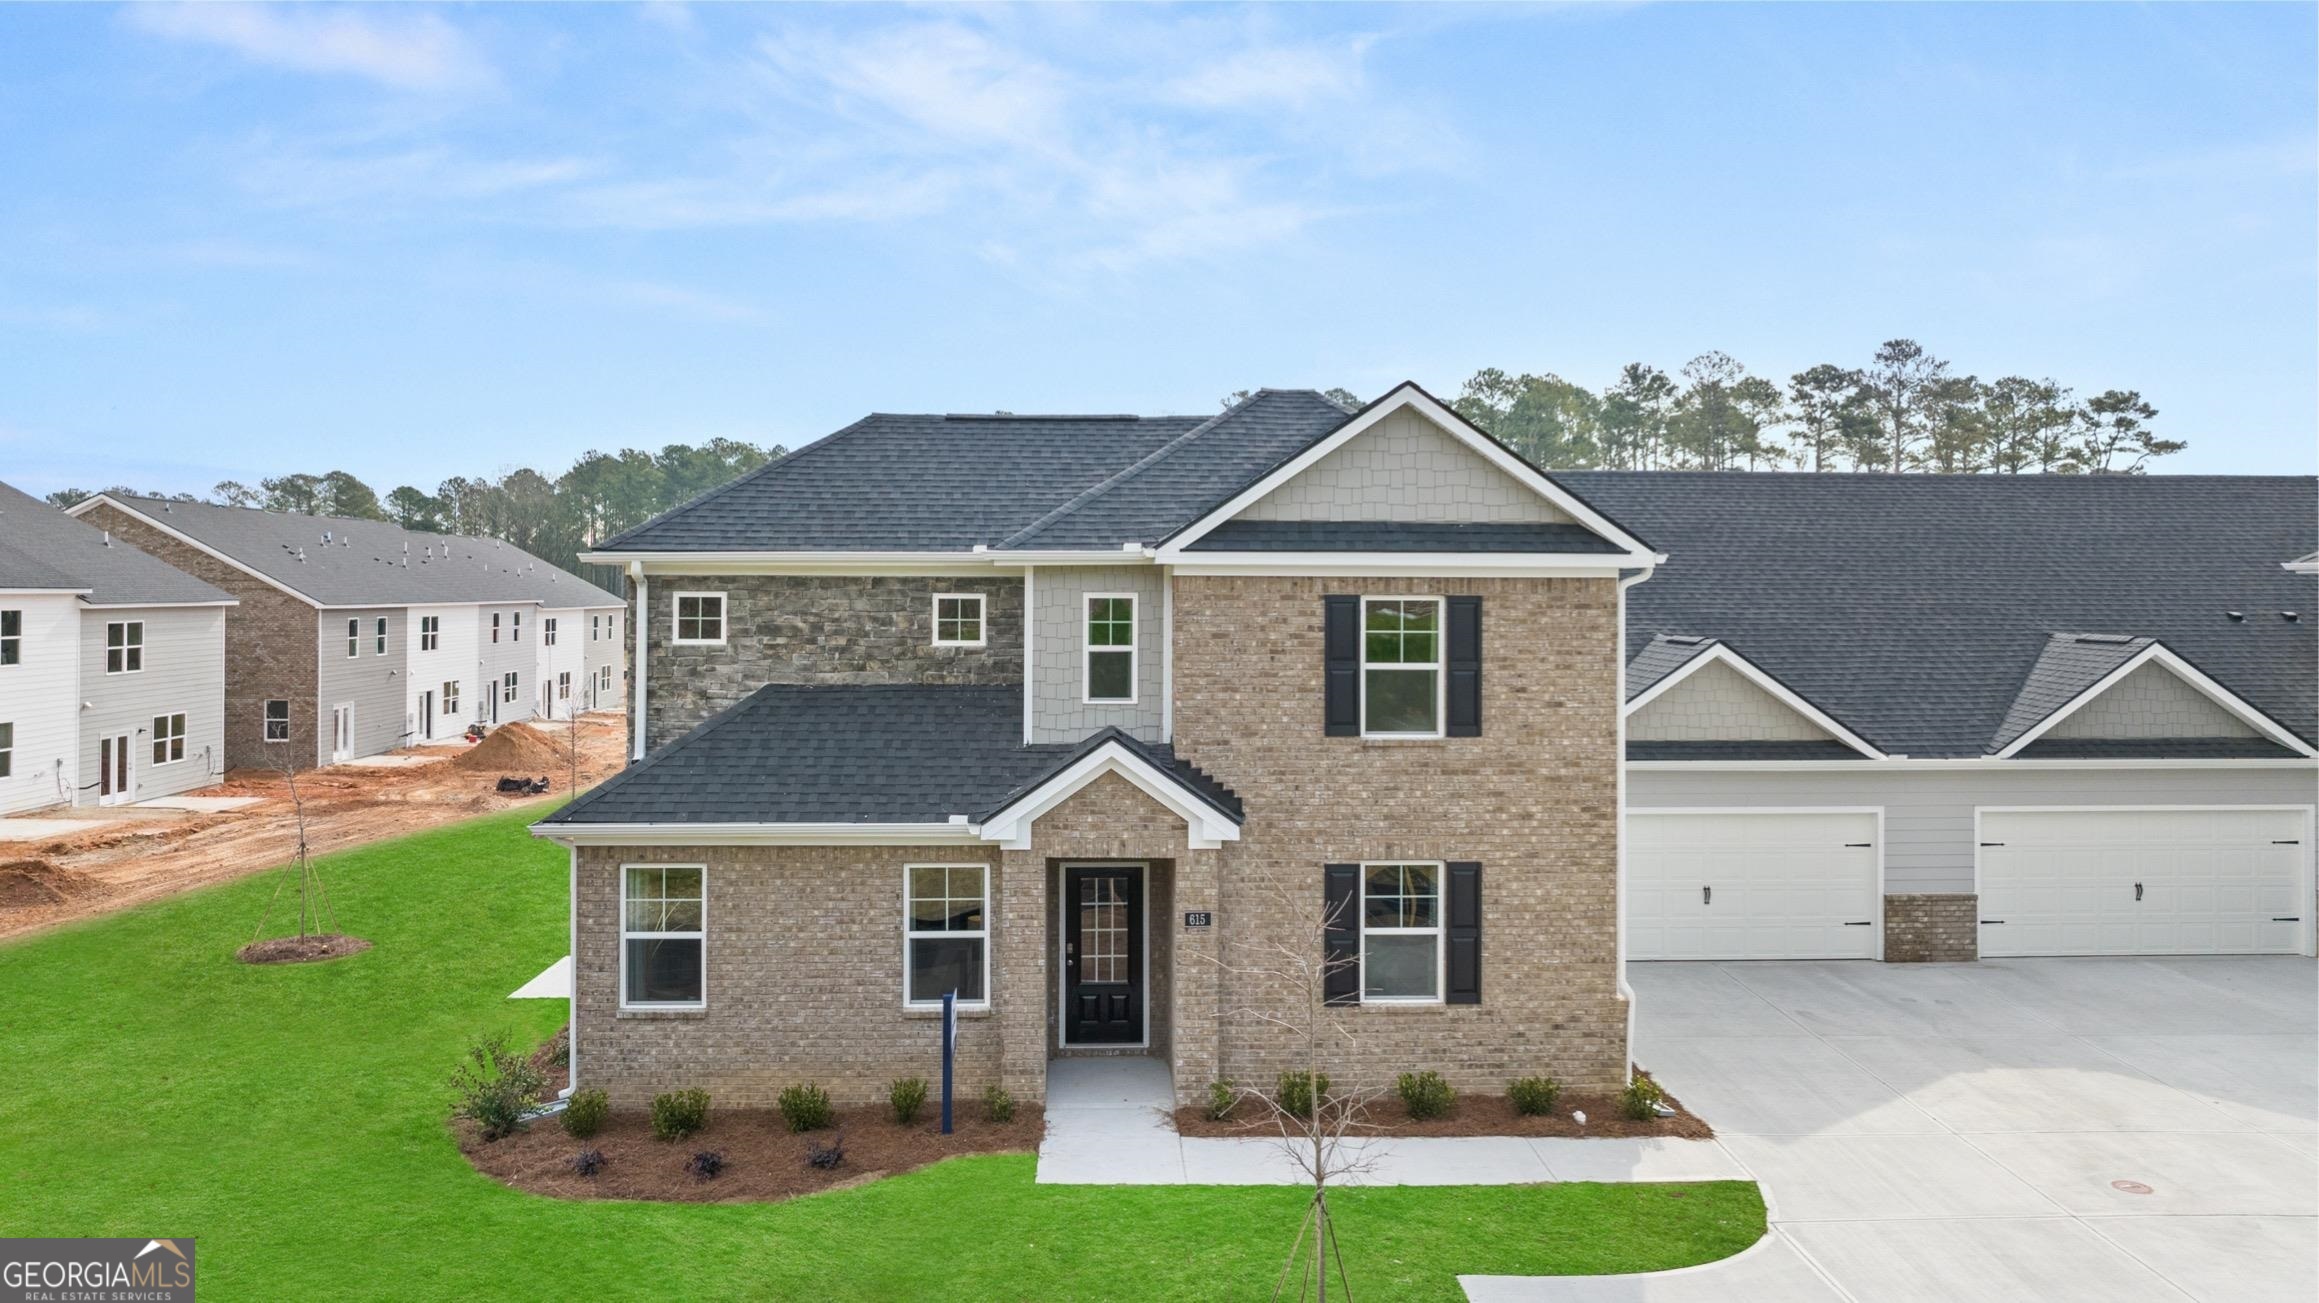 View Loganville, GA 30052 townhome